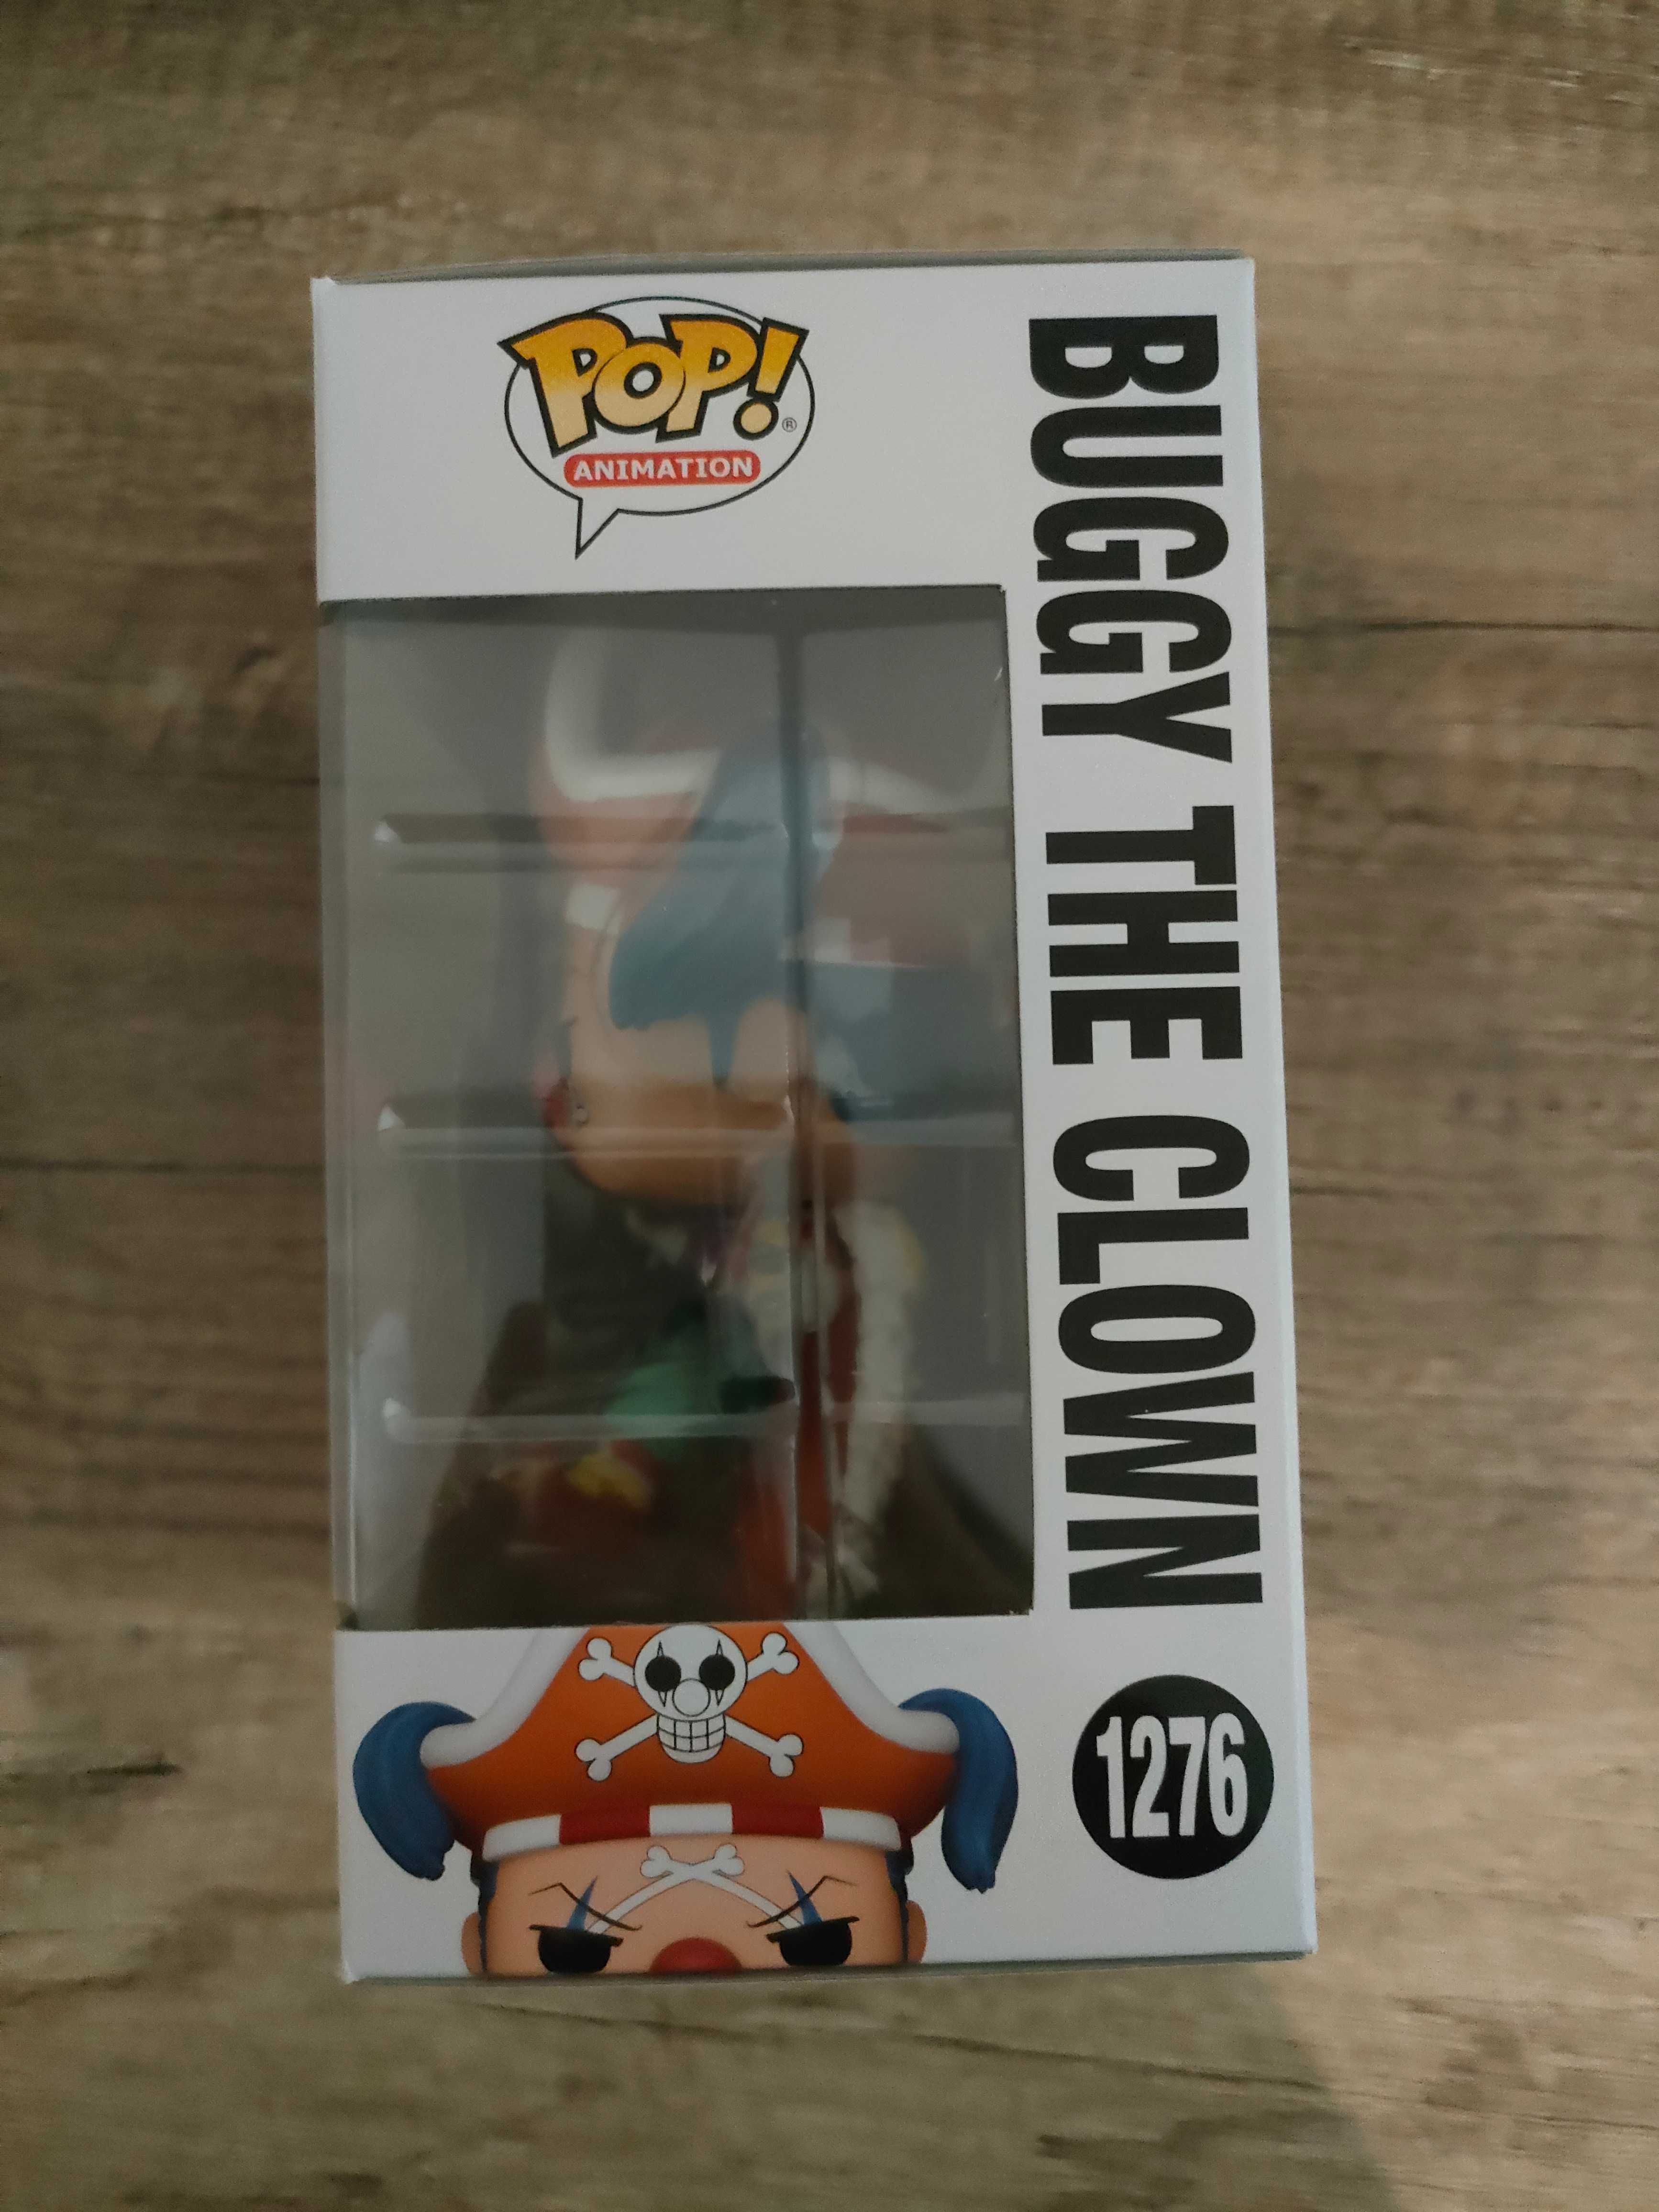 Funko Pop Animation One Piece
Buggy The Clown